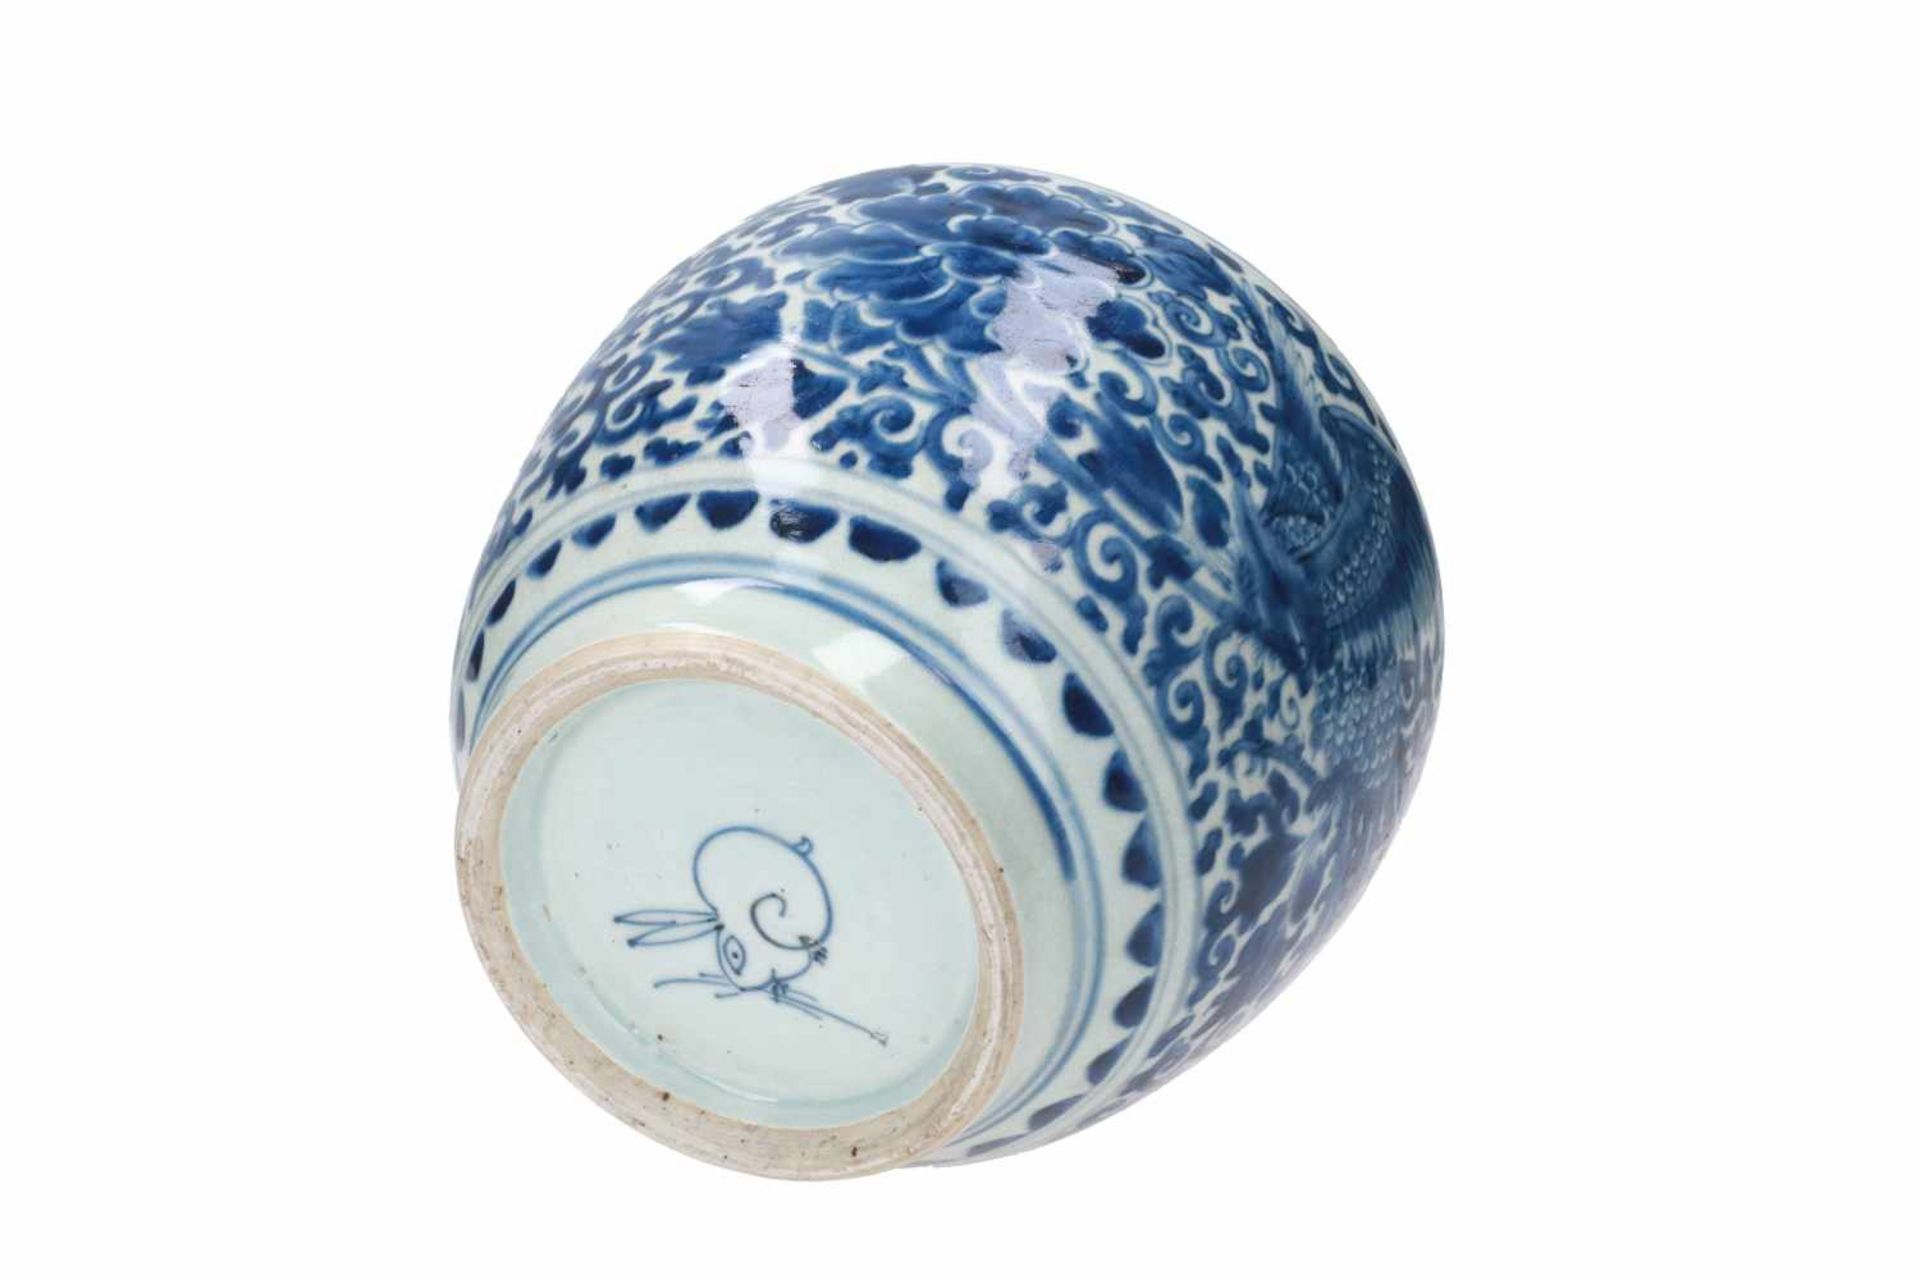 A blue and white porcelain jar, decorated with phoenixes and flowers. Marked with a hare. China, - Image 6 of 6